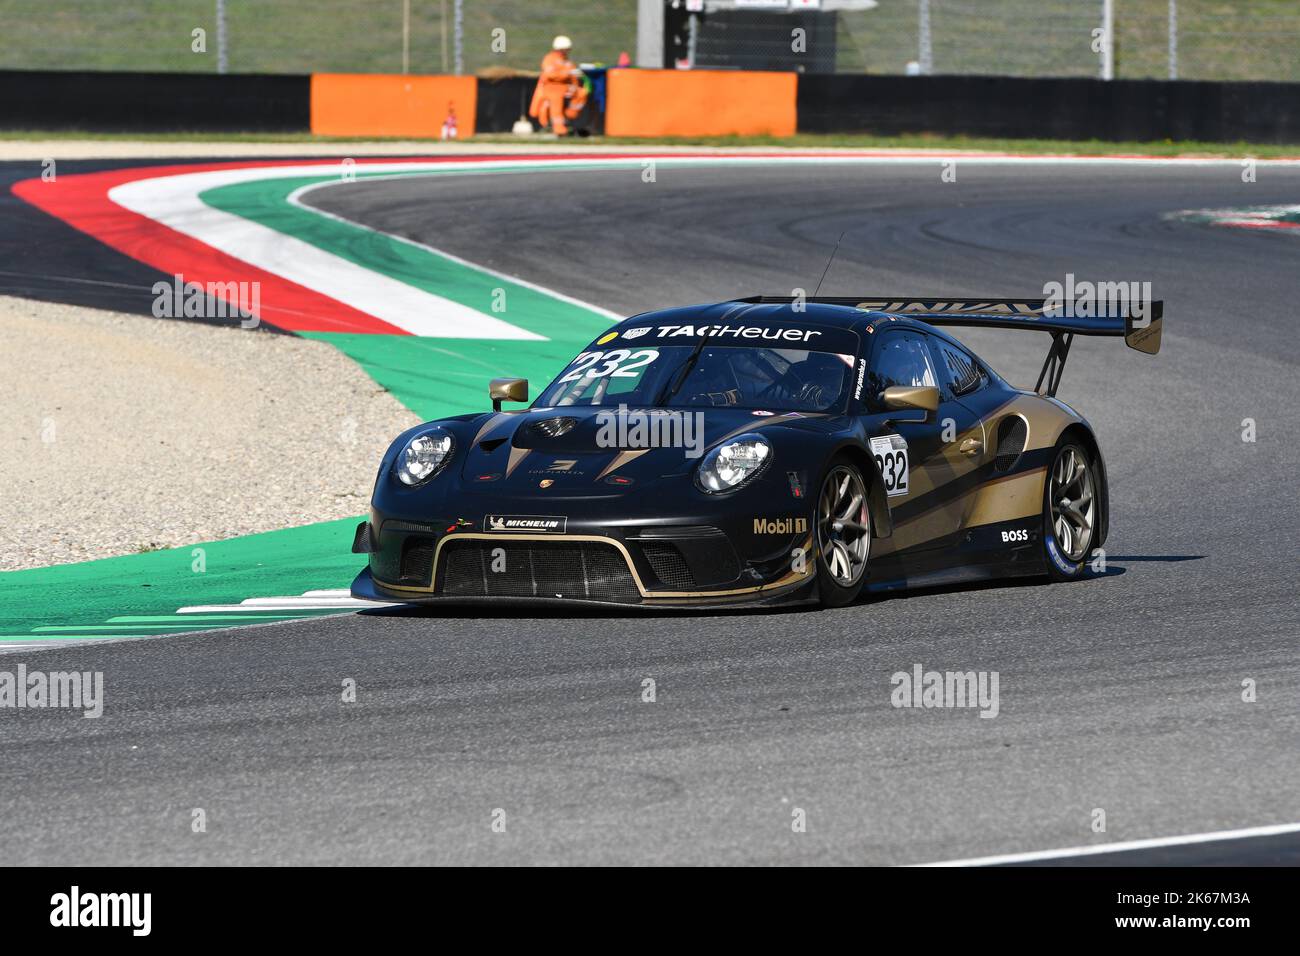 Mugello Circuit, Italy - 23 September 2022: Porsche 911 GT3 R in action at Mugello Circuit during Porsche Sports Cup Suisse event 2022 driven by unkno Stock Photo